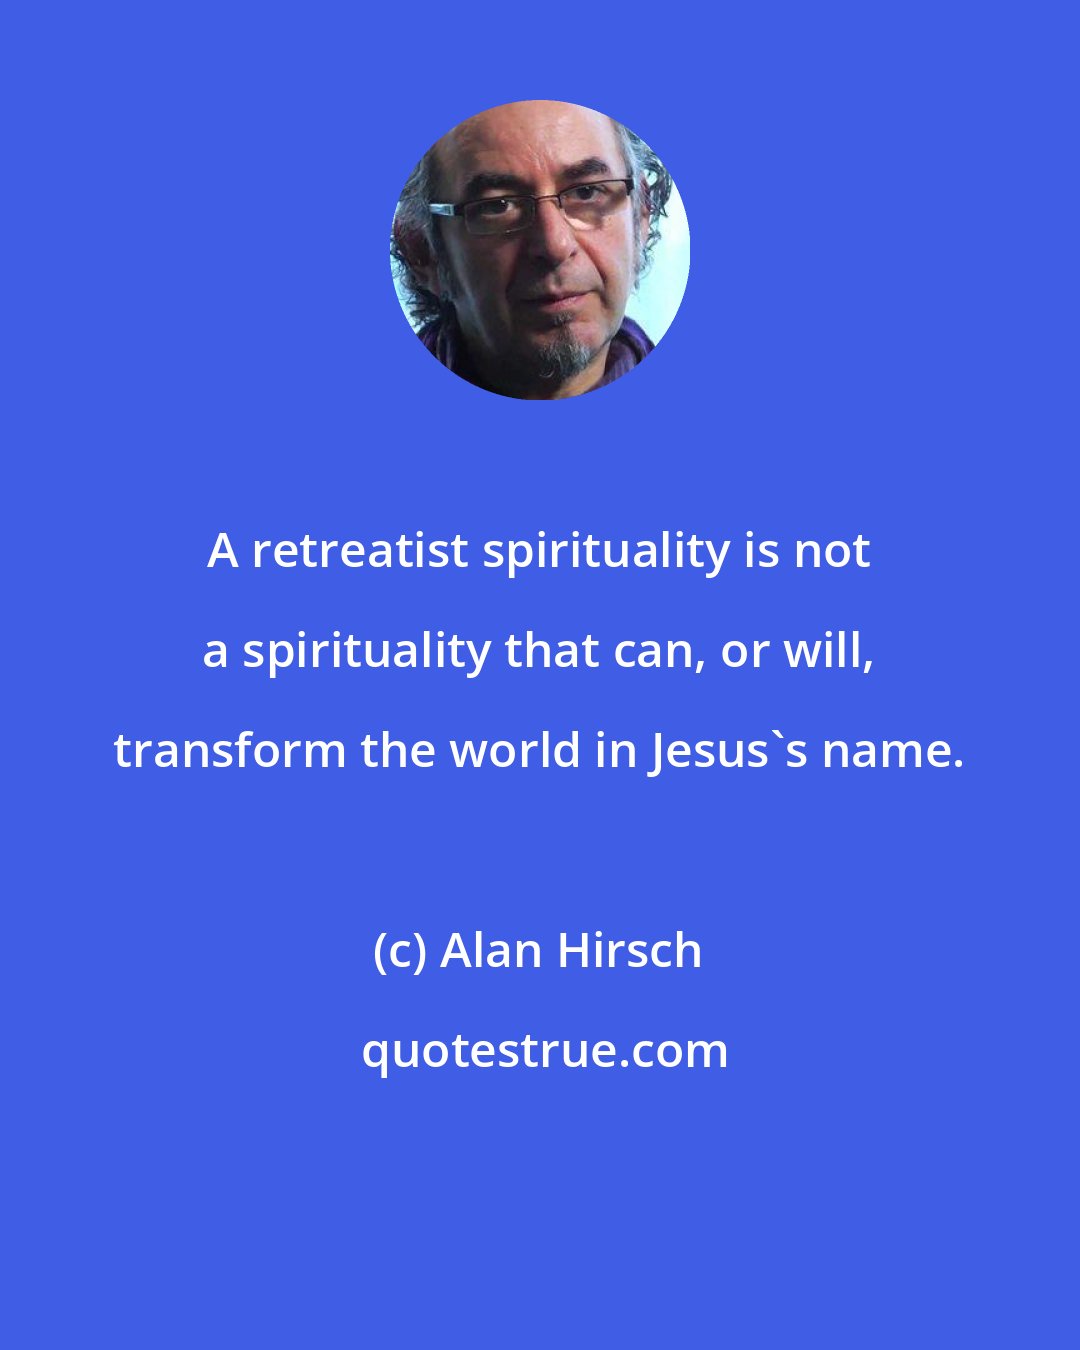 Alan Hirsch: A retreatist spirituality is not a spirituality that can, or will, transform the world in Jesus's name.